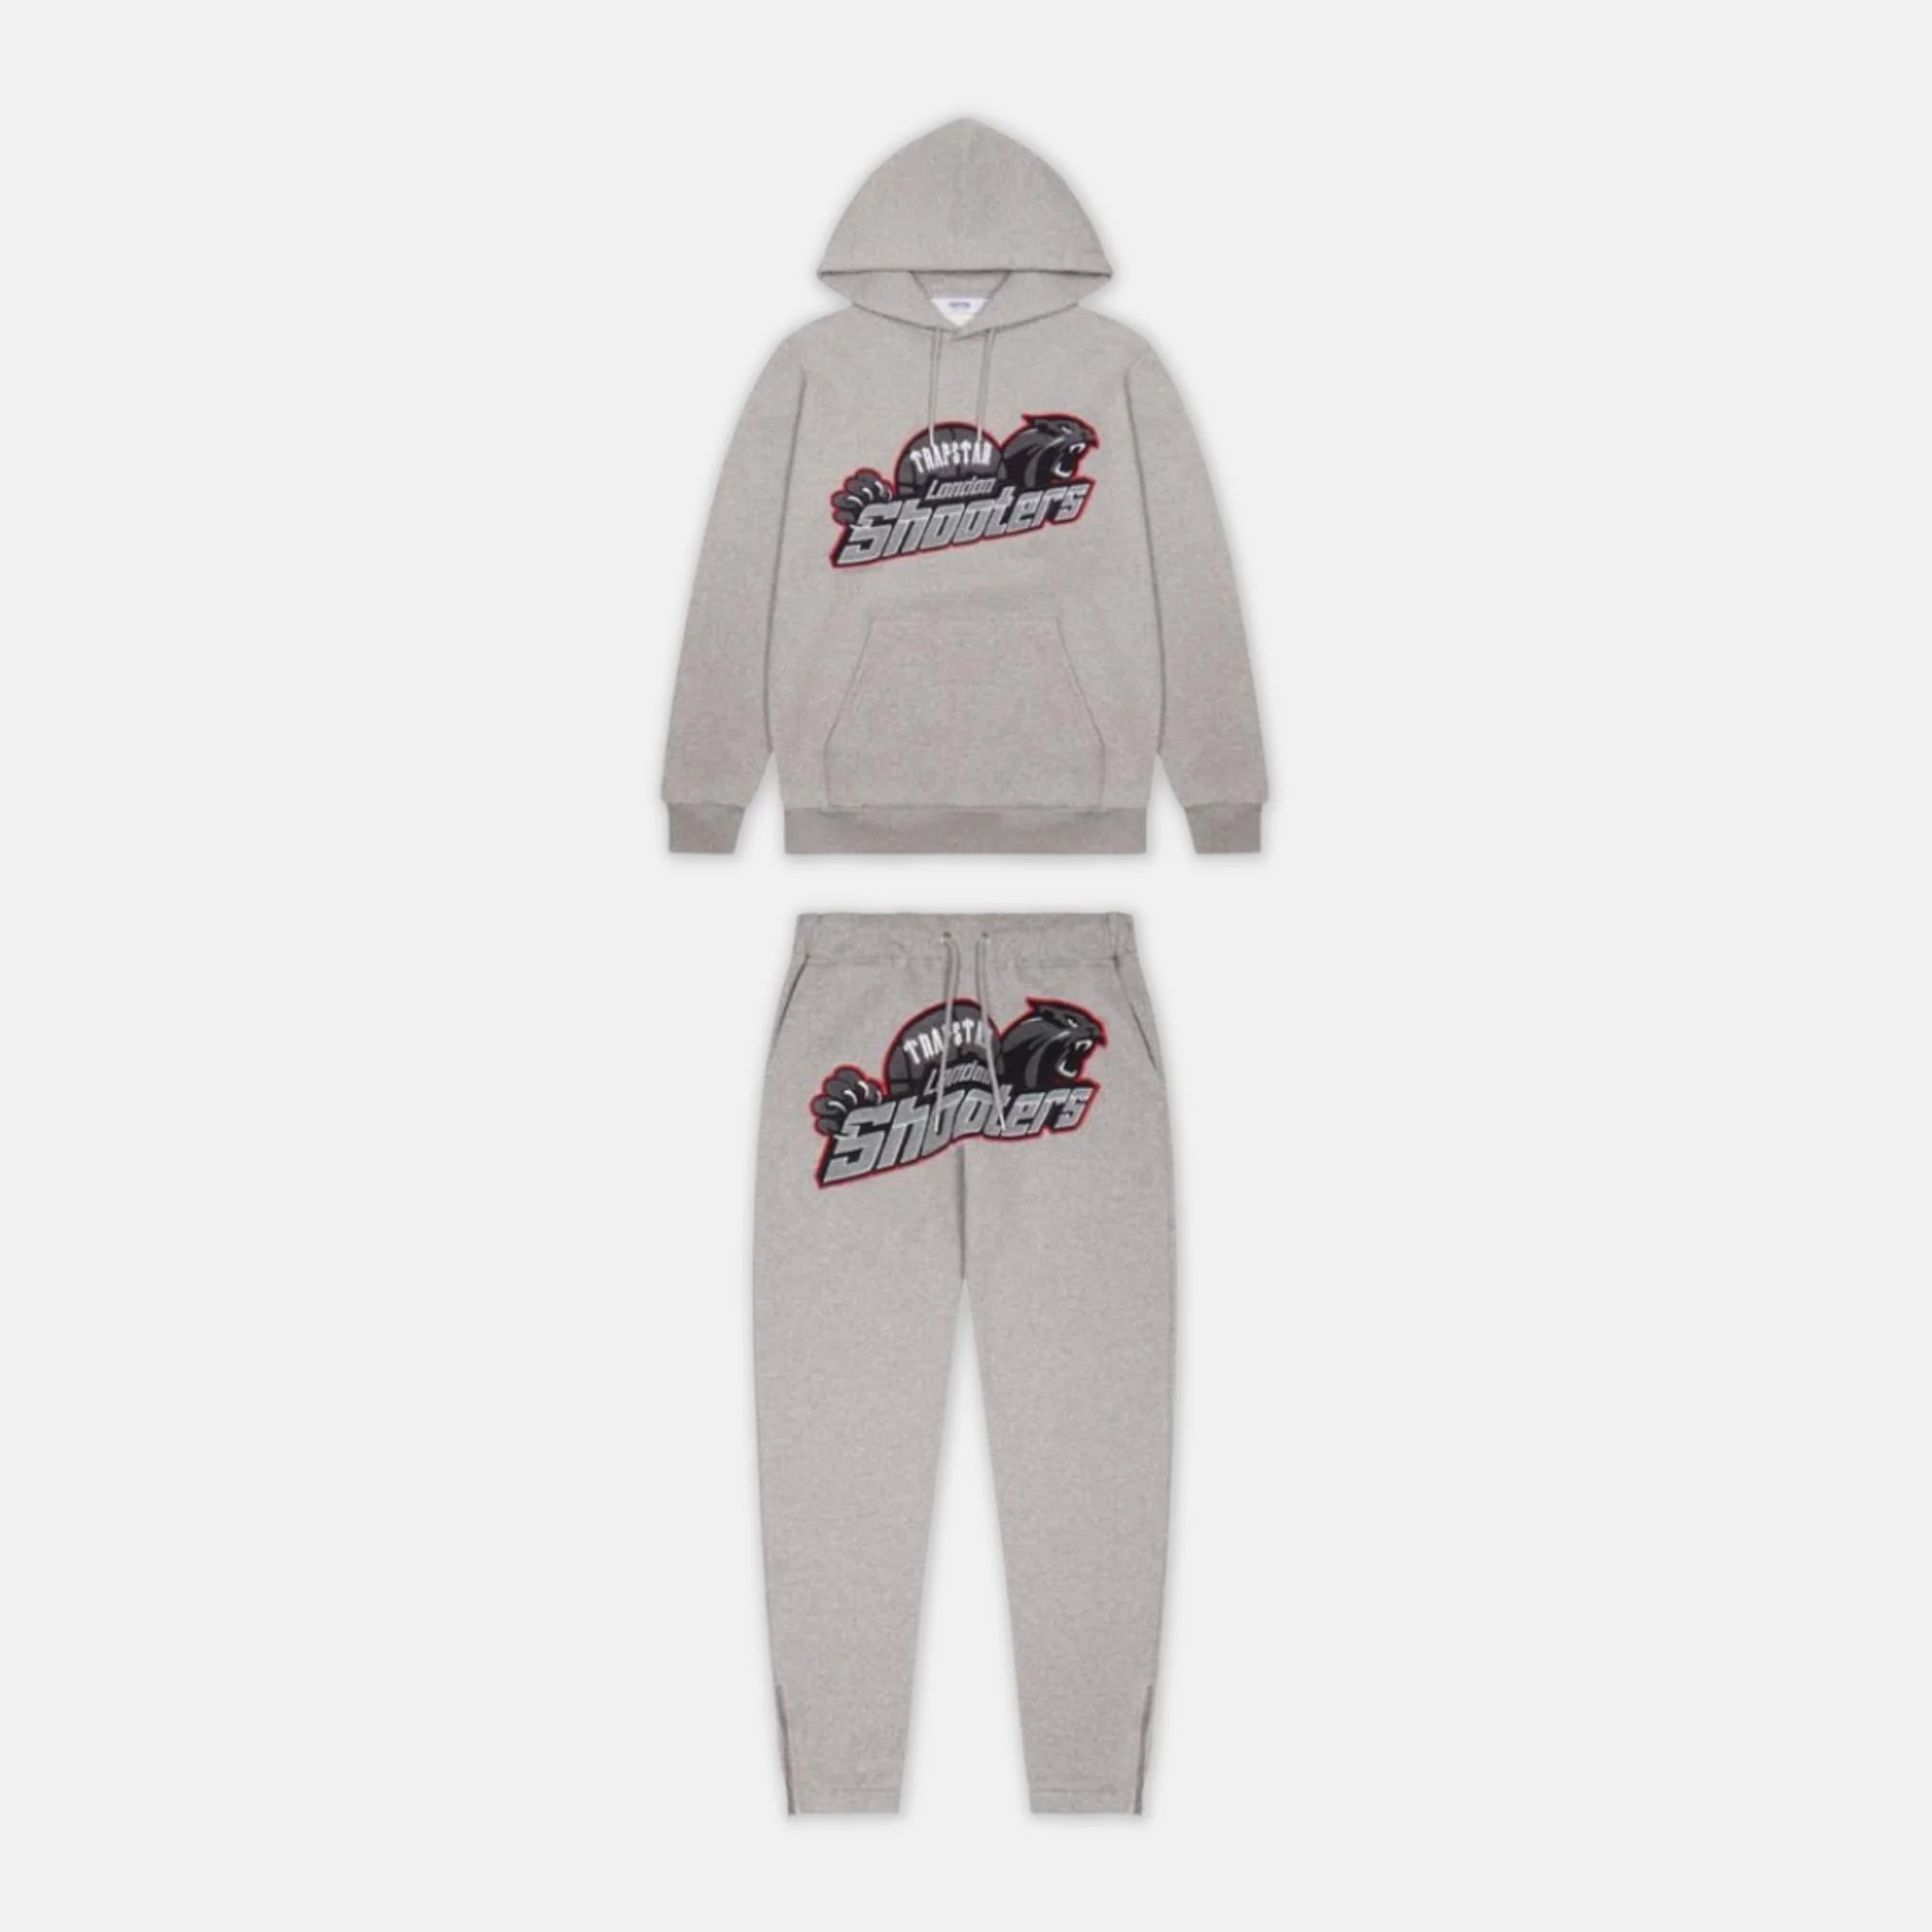 TRAPSTAR SHOOTERS HOODED TRACKSUIT - GREY / RED KICKKONNECT